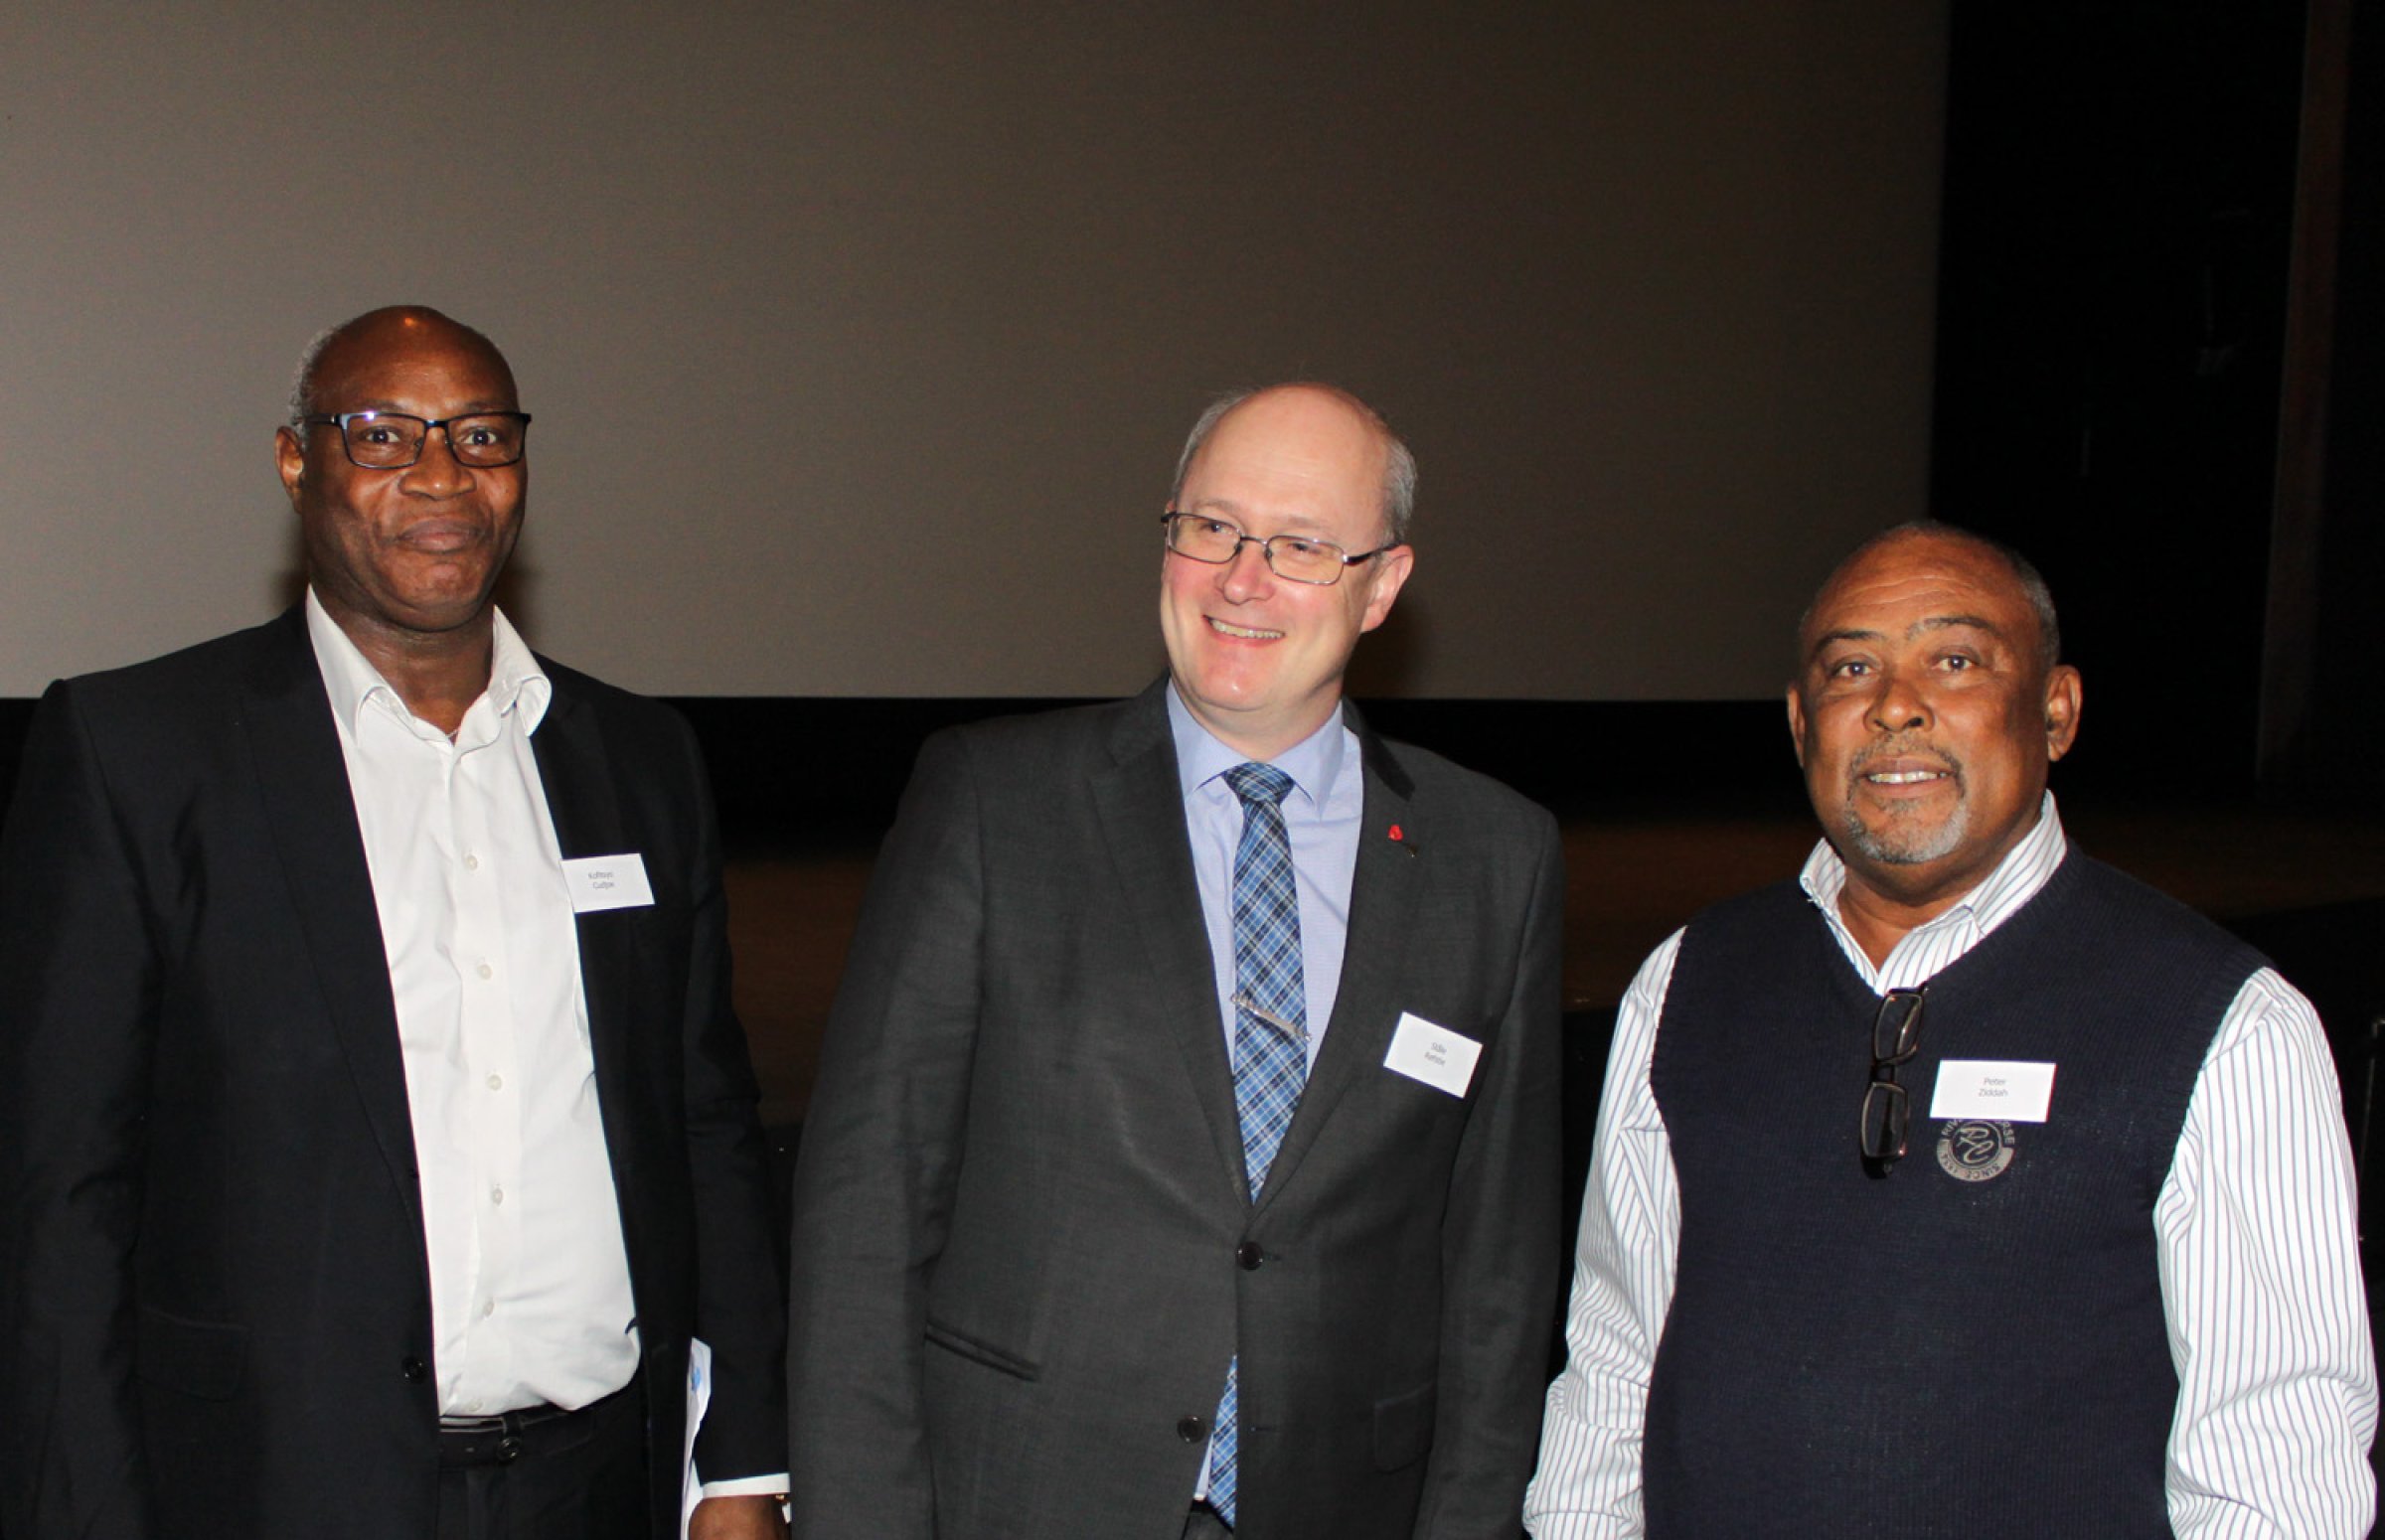 From left: Dr Kofitsyo Cudjoe, who is also the head of Food Bacteriology at the Norwegian Veterinary Institute, Mayor of Sunndal, Ståle Refstie who  opened the seminar and   The Director of Fish Health from Ghana’s Fishery Commission, Dr Peter Ziddah.